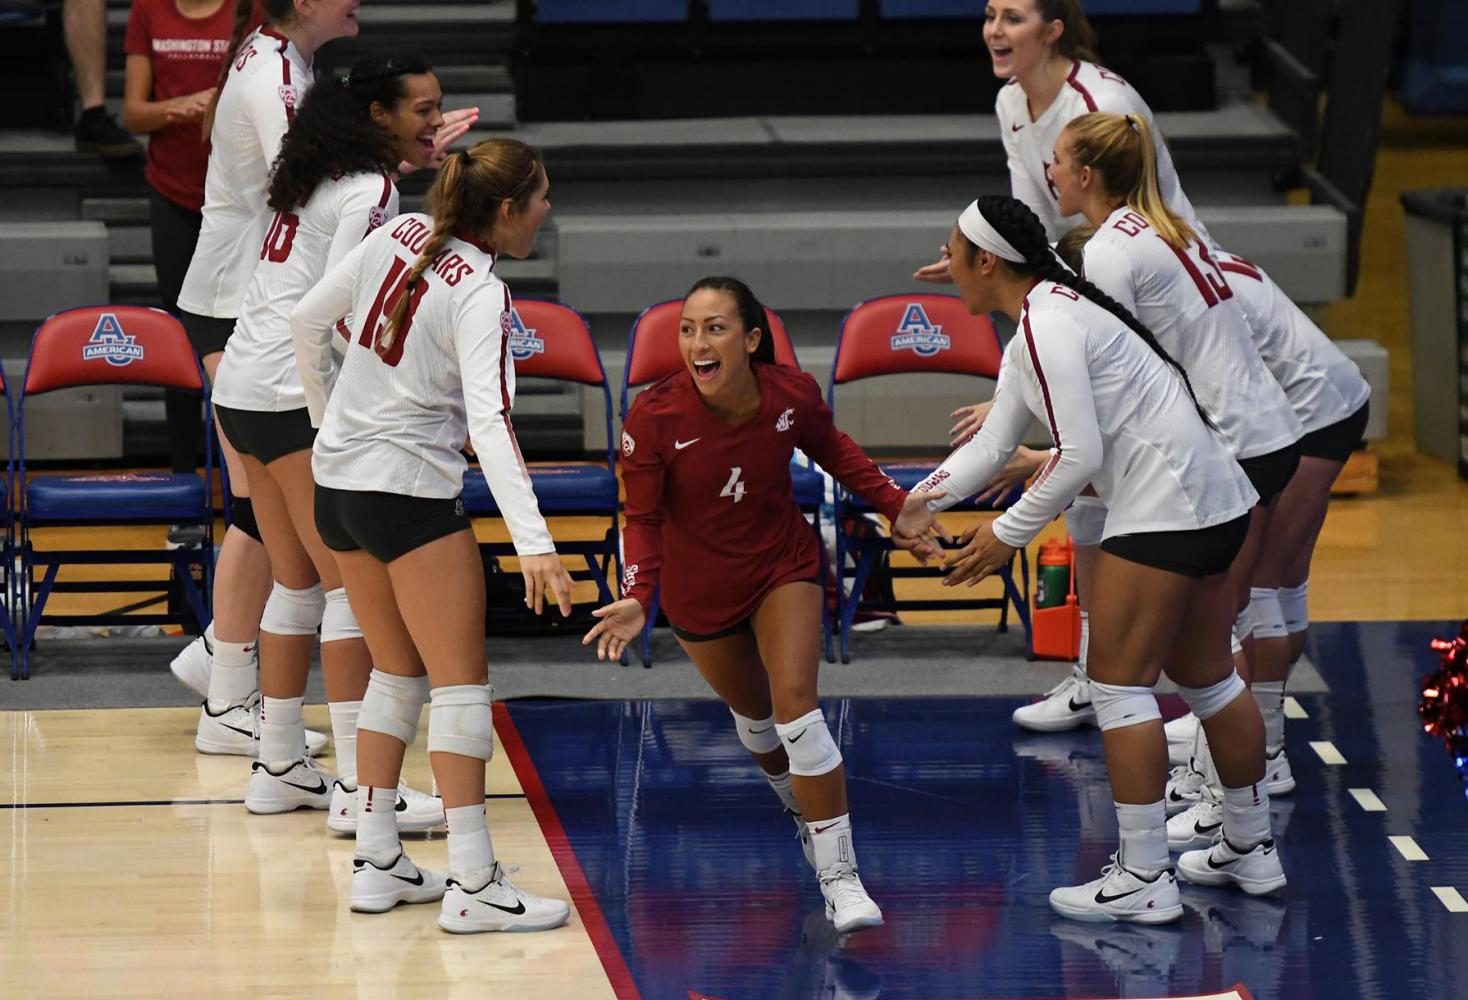 Sophomore defensive specialist Alexis Dirige high-fives teammates as she runs onto the court Monday evening in Washington D.C.
